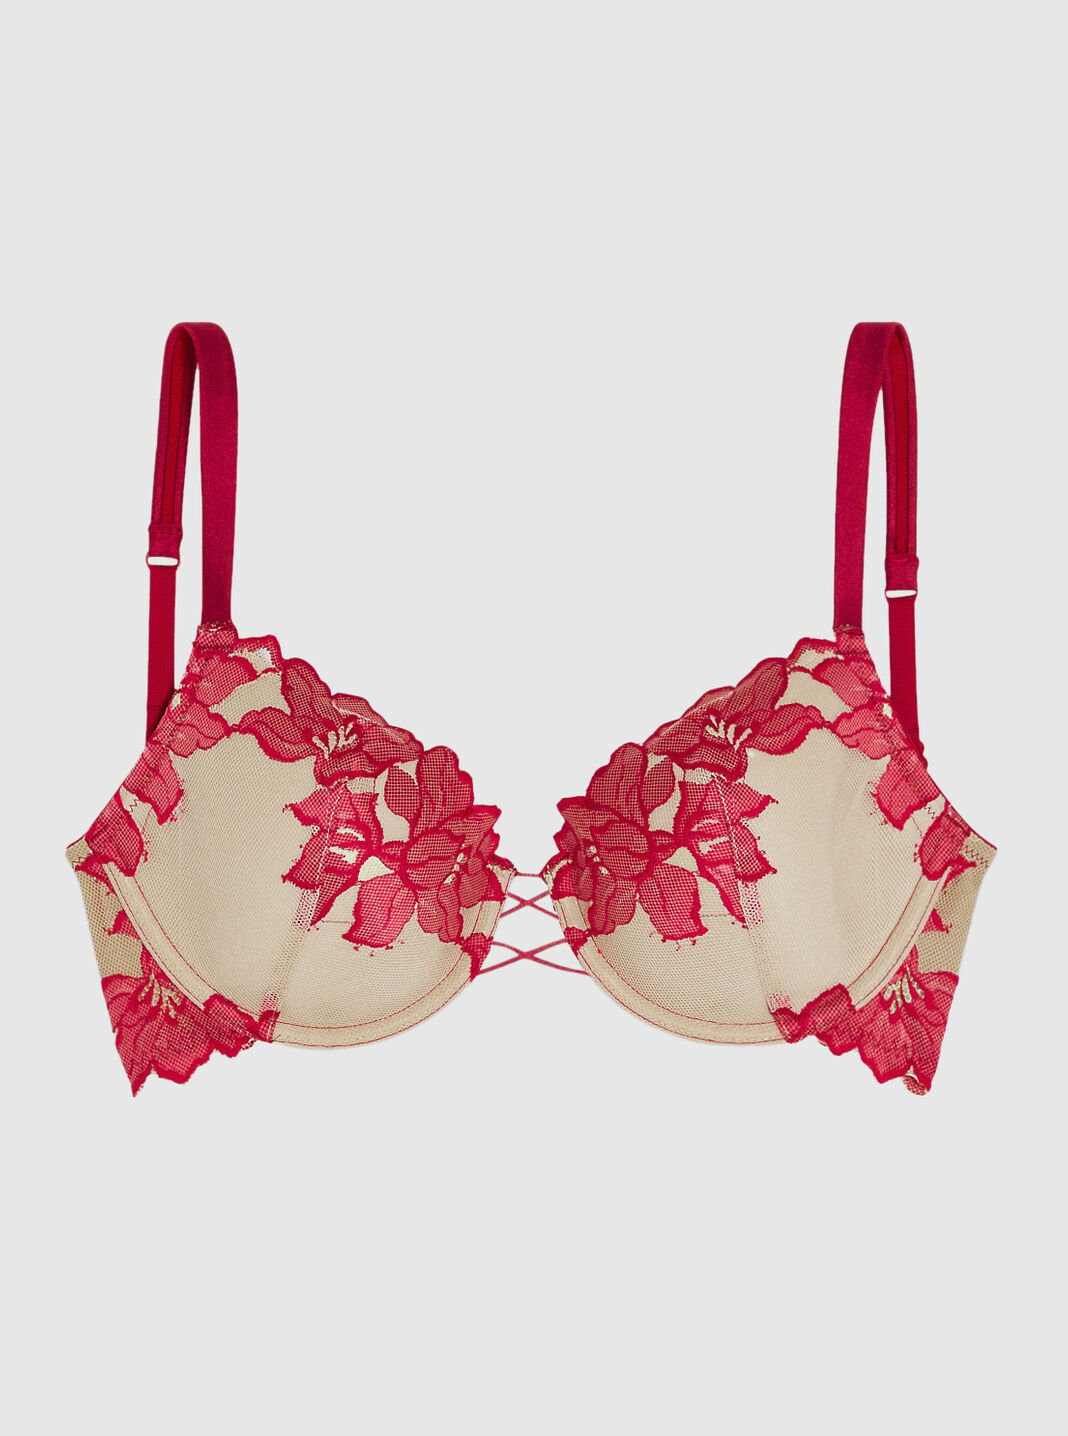 Spandex Soft and Comfortable Non-Pushup Bra For Women - Red - VAJRed